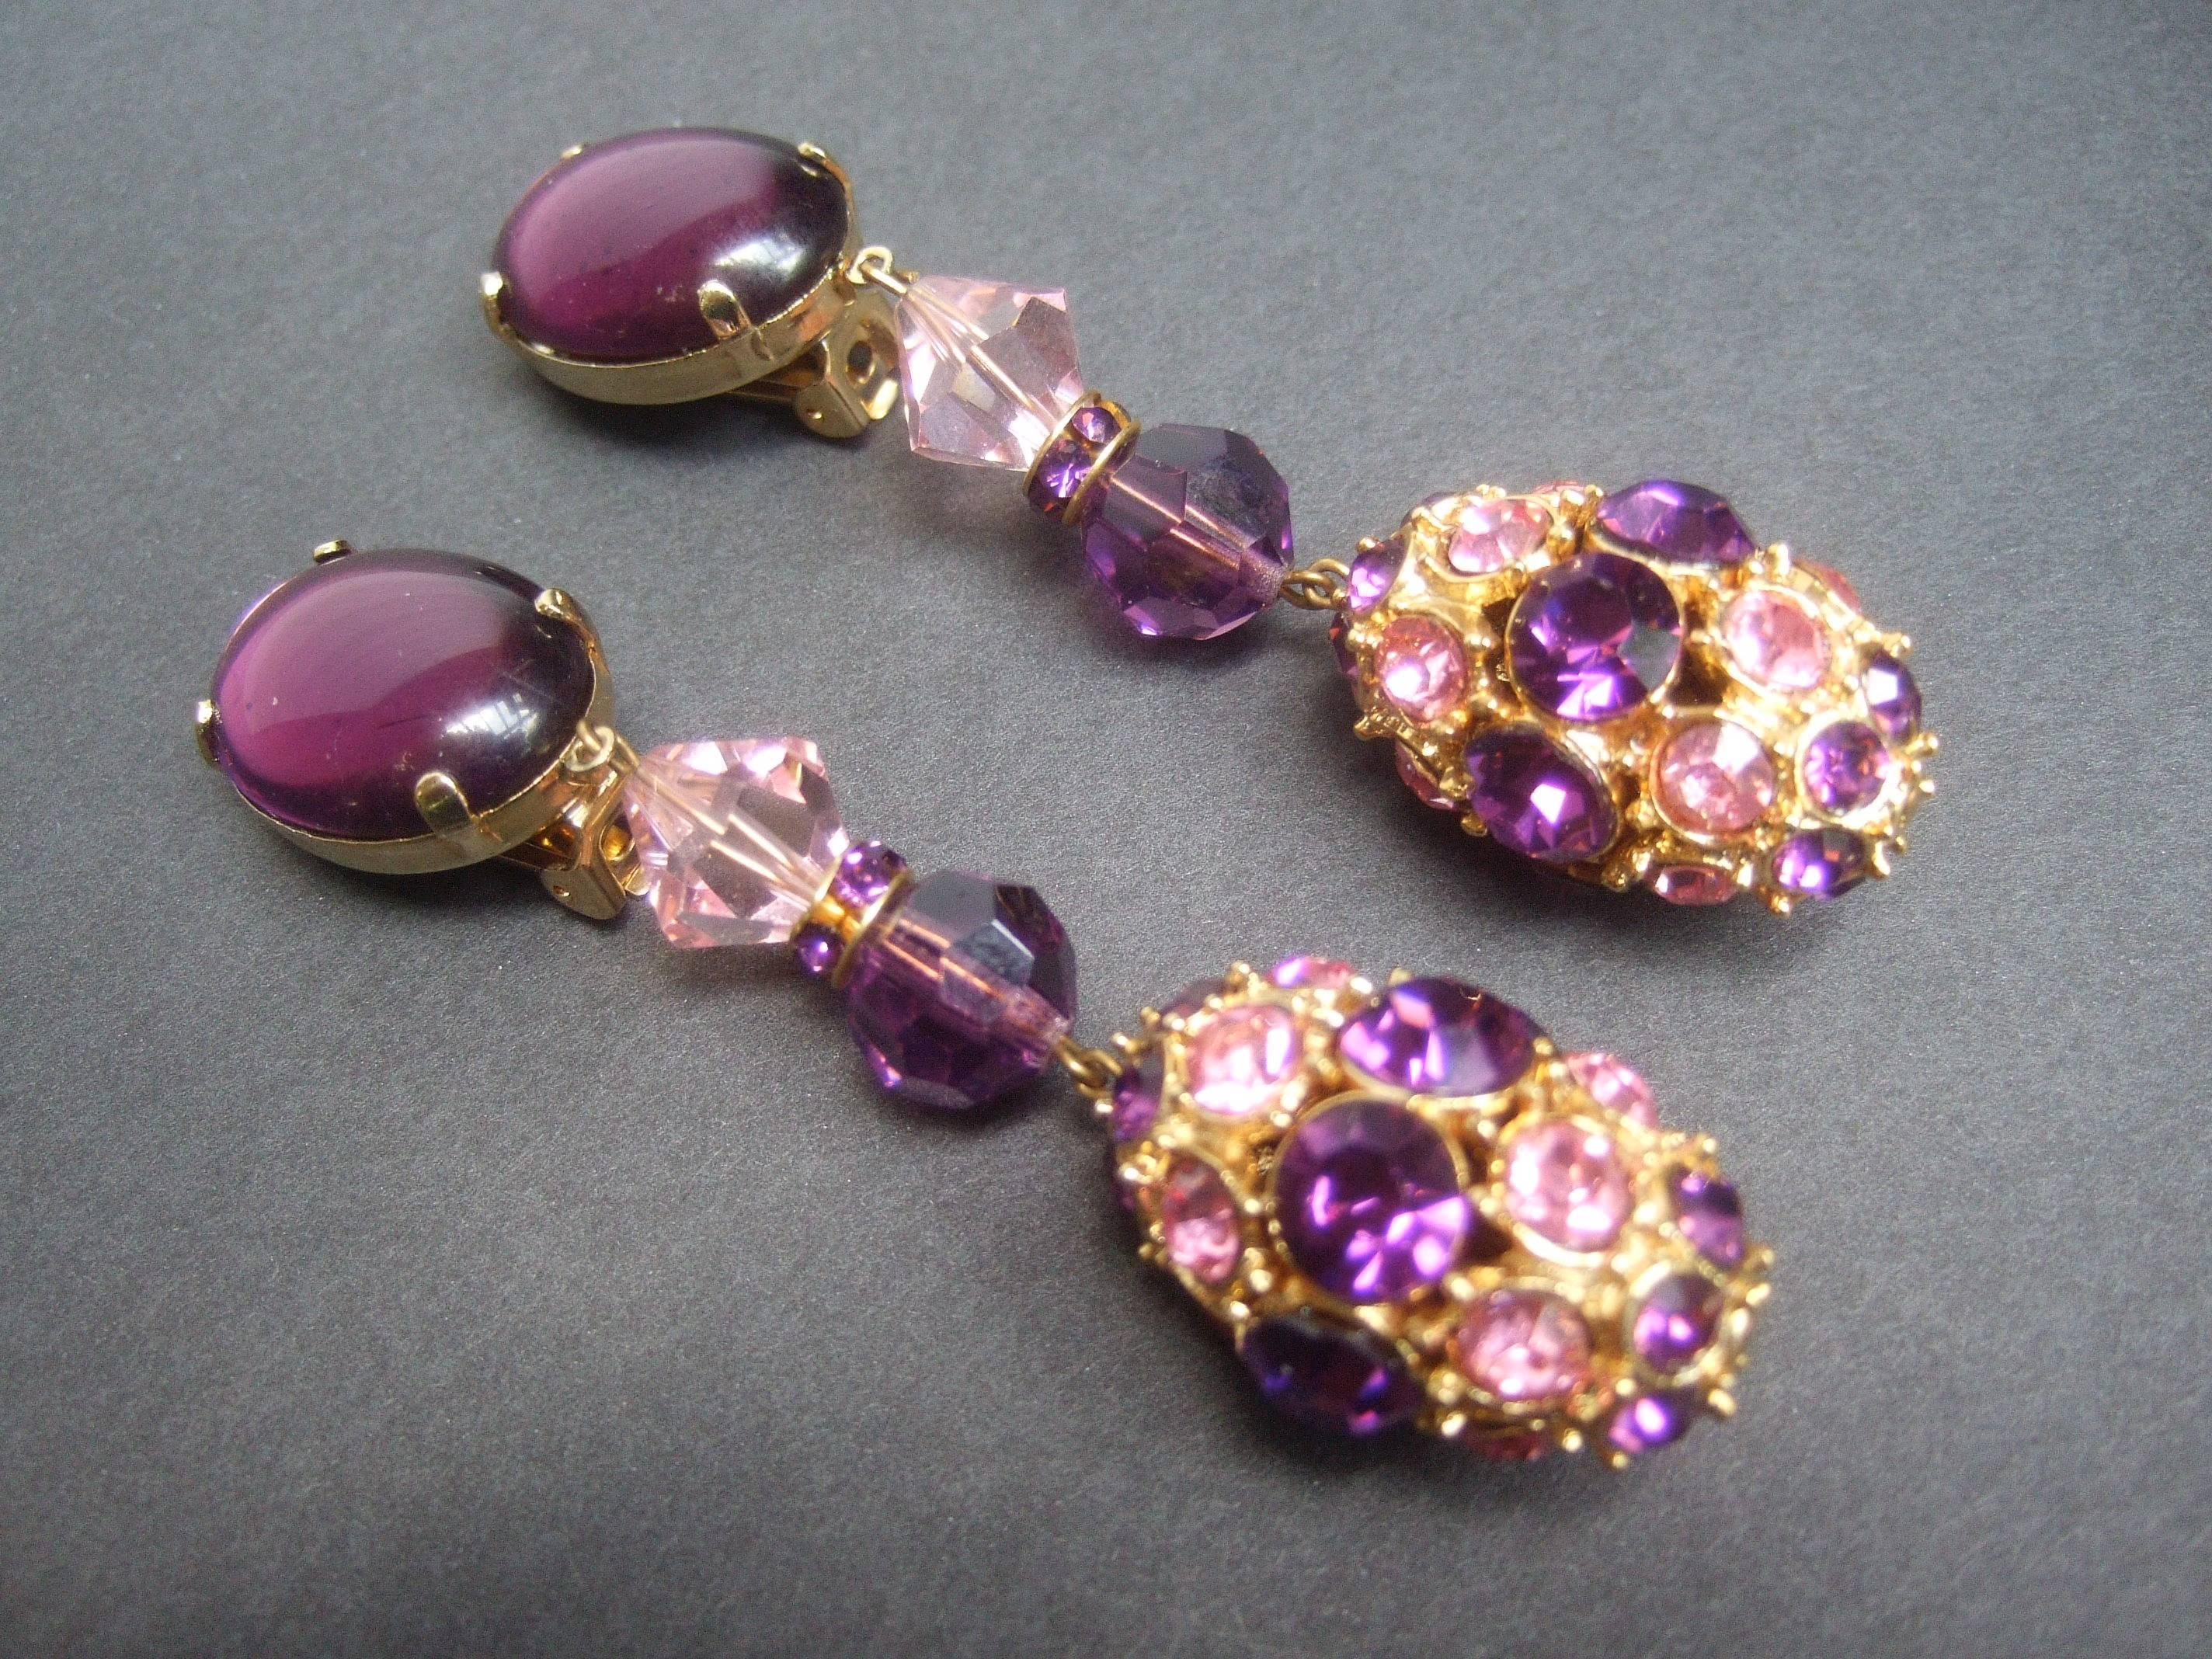 Massive Glittering Amethyst Crystal Dangling Earrings c 1970 In Good Condition For Sale In University City, MO